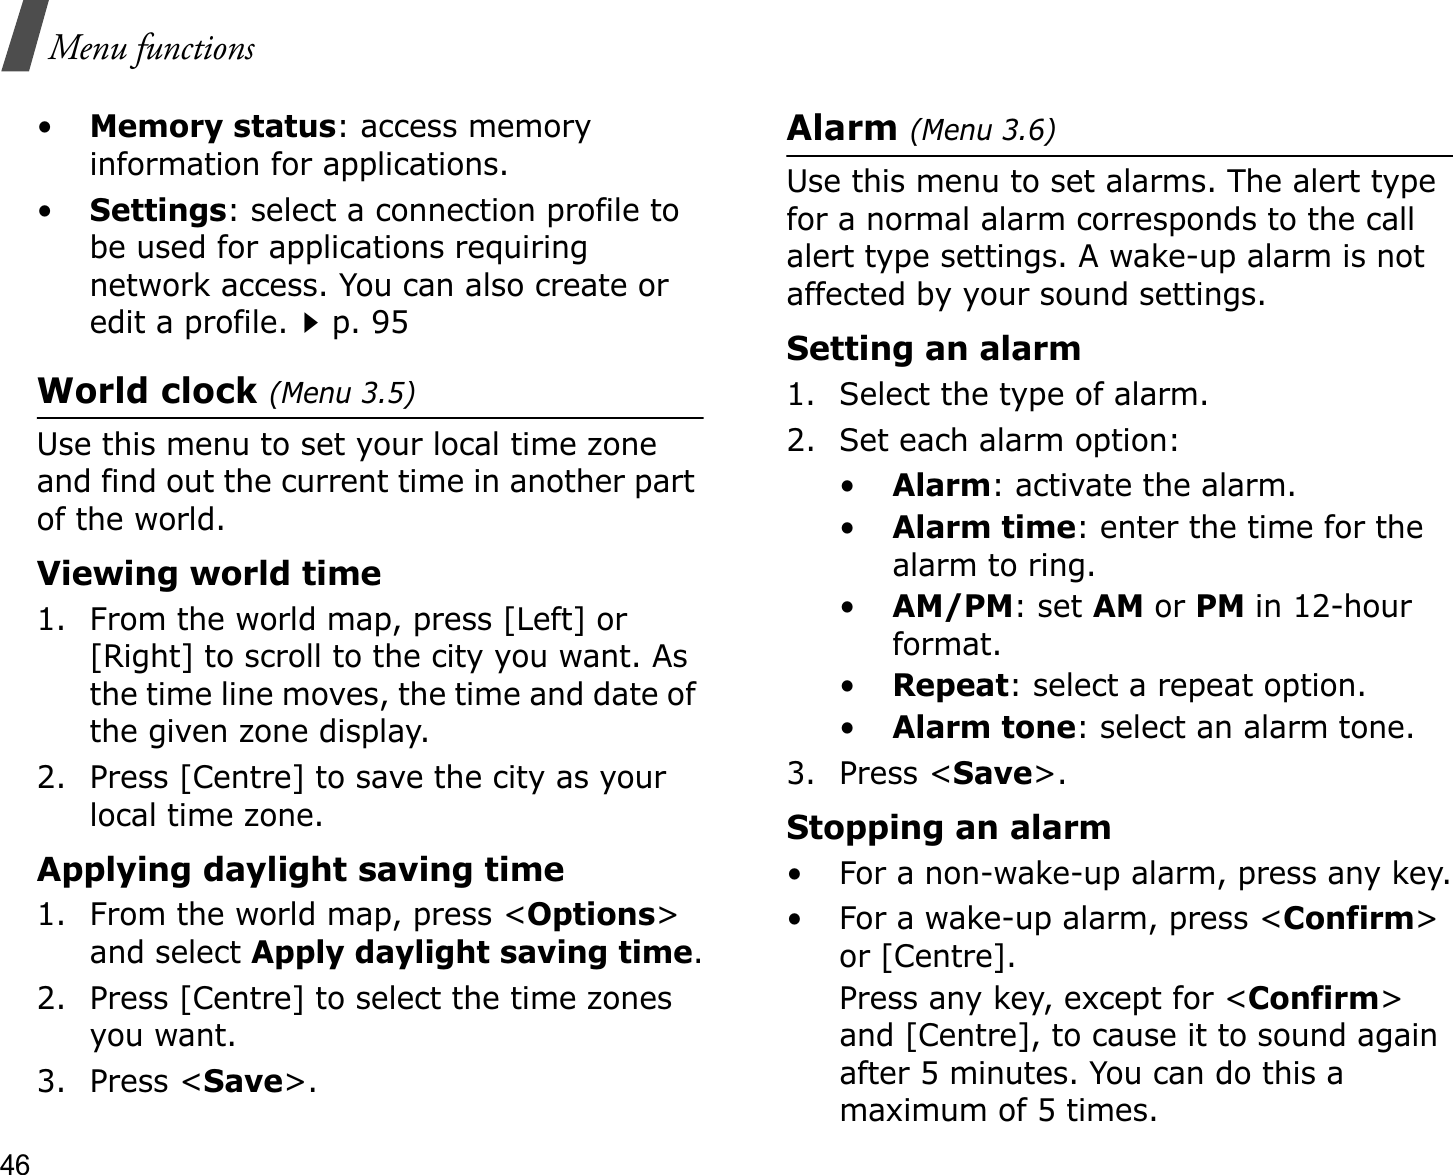 46Menu functions•Memory status: access memory information for applications.•Settings: select a connection profile to be used for applications requiring network access. You can also create or edit a profile.p. 95World clock (Menu 3.5)Use this menu to set your local time zone and find out the current time in another part of the world. Viewing world time1. From the world map, press [Left] or [Right] to scroll to the city you want. As the time line moves, the time and date of the given zone display.2. Press [Centre] to save the city as your local time zone.Applying daylight saving time1. From the world map, press &lt;Options&gt;and select Apply daylight saving time.2. Press [Centre] to select the time zones you want. 3. Press &lt;Save&gt;.Alarm (Menu 3.6) Use this menu to set alarms. The alert type for a normal alarm corresponds to the call alert type settings. A wake-up alarm is not affected by your sound settings.Setting an alarm1. Select the type of alarm.2. Set each alarm option:•Alarm: activate the alarm.•Alarm time: enter the time for the alarm to ring.•AM/PM: set AM or PM in 12-hour format.•Repeat: select a repeat option.•Alarm tone: select an alarm tone.3. Press &lt;Save&gt;.Stopping an alarm• For a non-wake-up alarm, press any key.• For a wake-up alarm, press &lt;Confirm&gt;or [Centre]. Press any key, except for &lt;Confirm&gt;and [Centre], to cause it to sound again after 5 minutes. You can do this a maximum of 5 times.